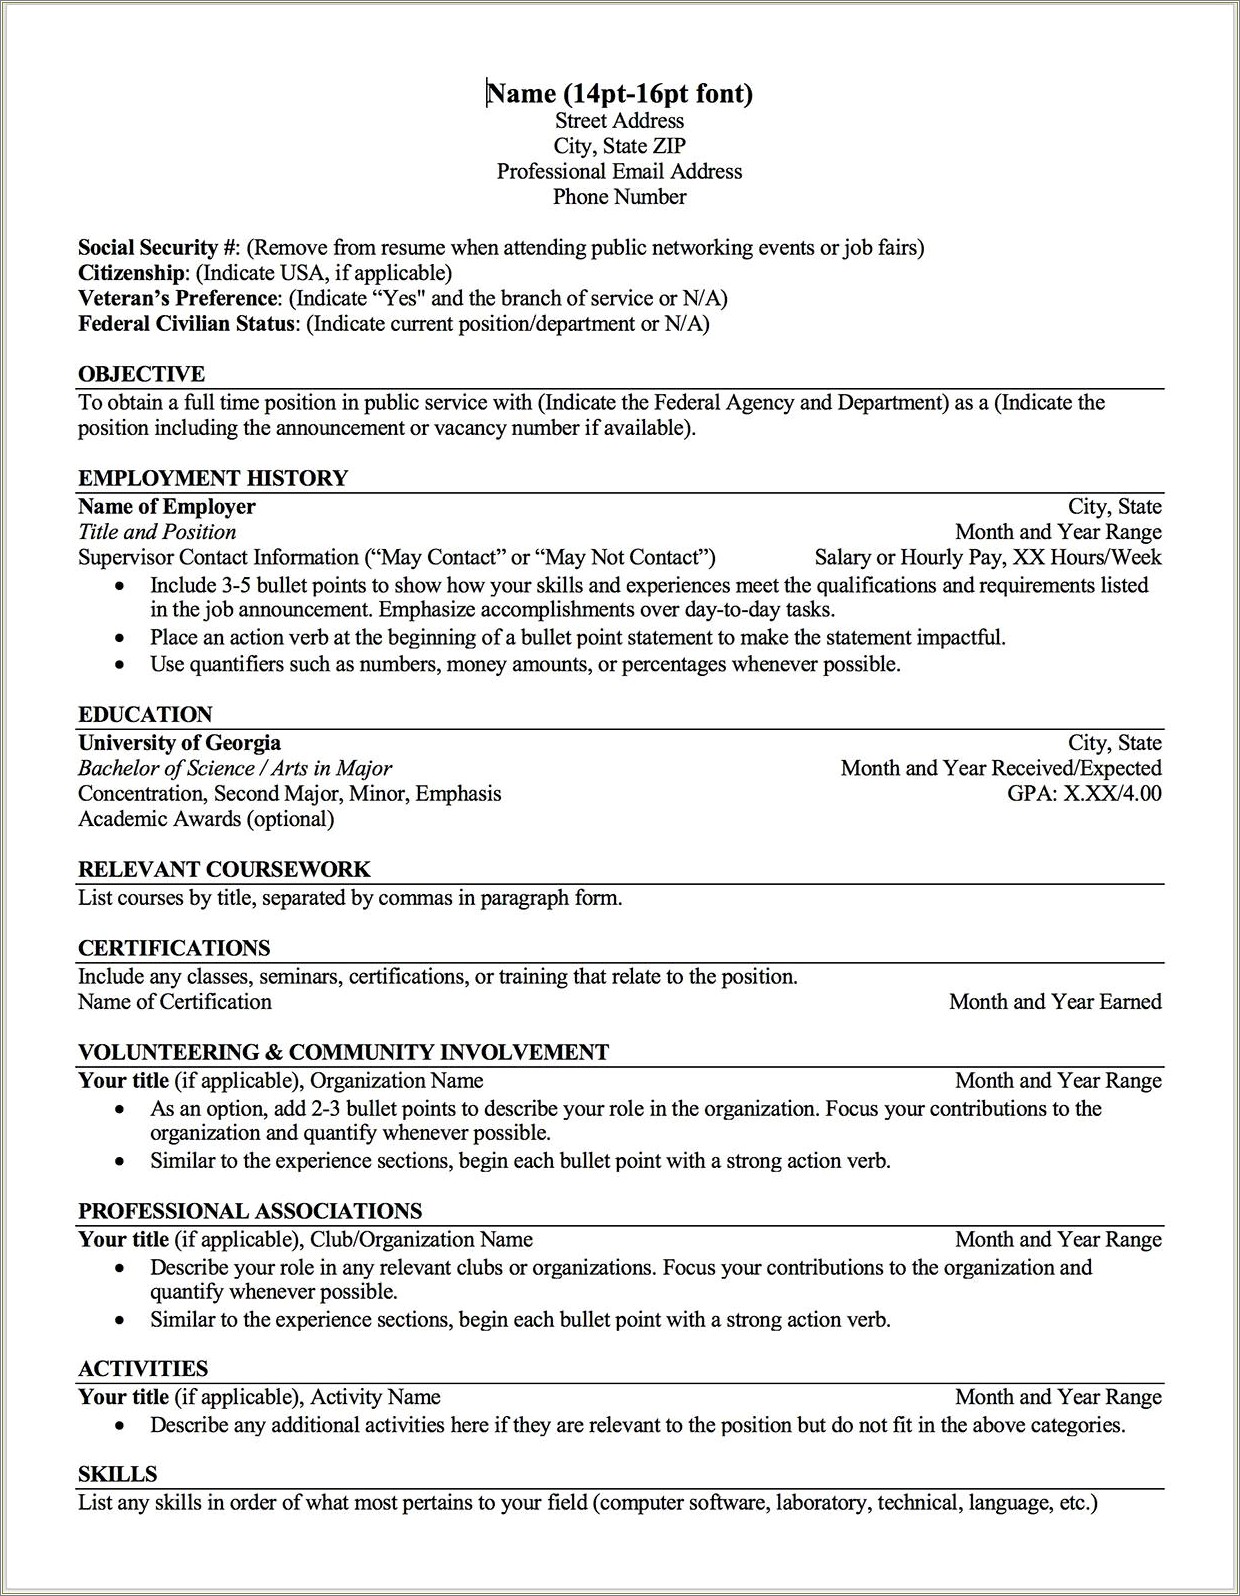 Separating Work Experience From Skills In A Resume